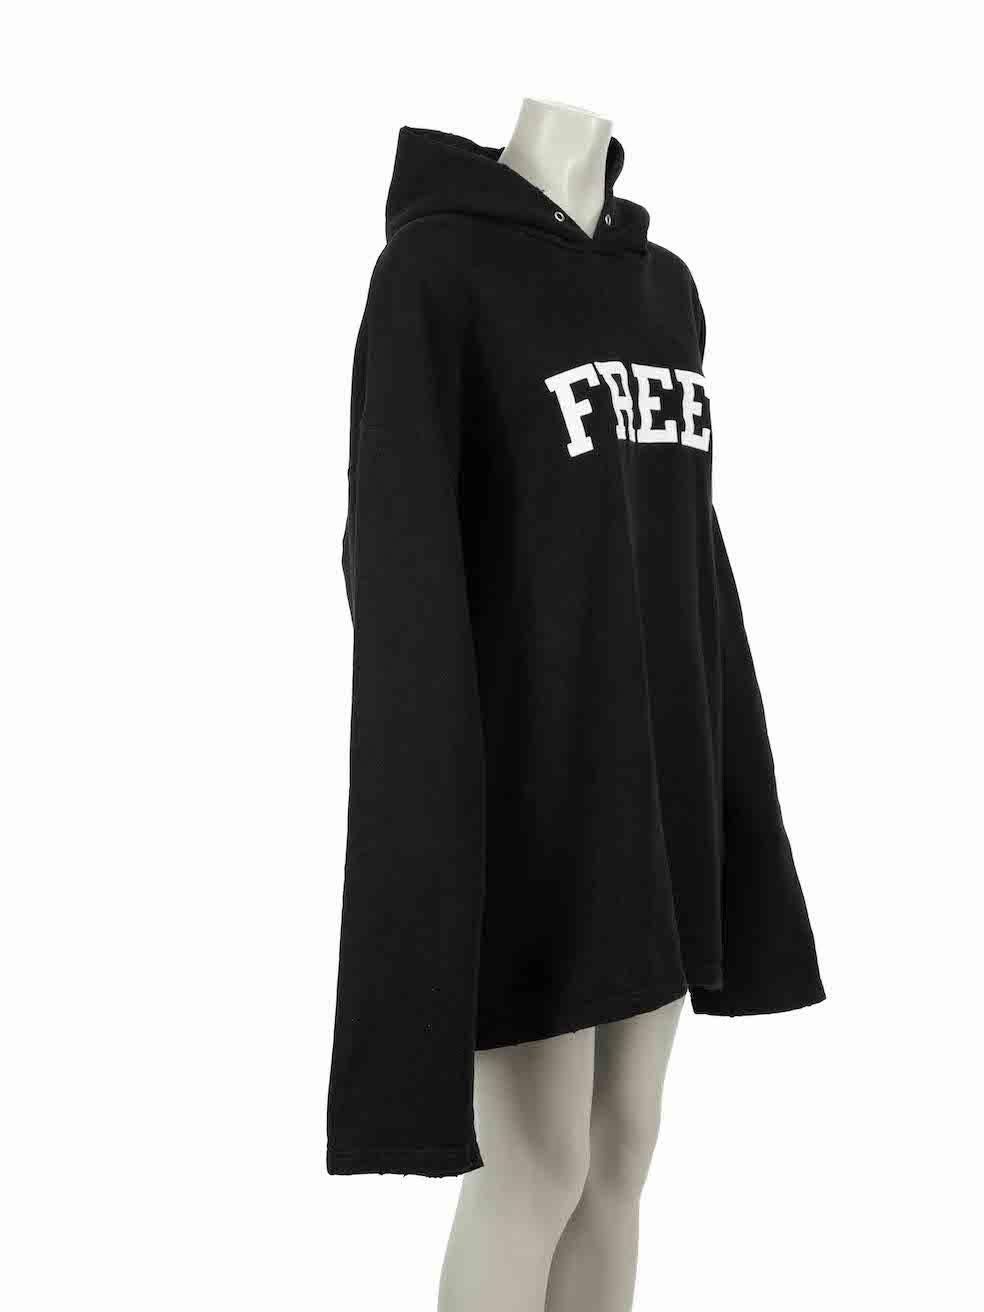 CONDITION is Very good. Hardly any visible wear to jumper is evident on this used Balenciaga designer resale item. Please note that the distressing around hemlines and edge of hood is intentional.
 
Details
Unisex
Black
Cotton
Oversized hoodie
Free